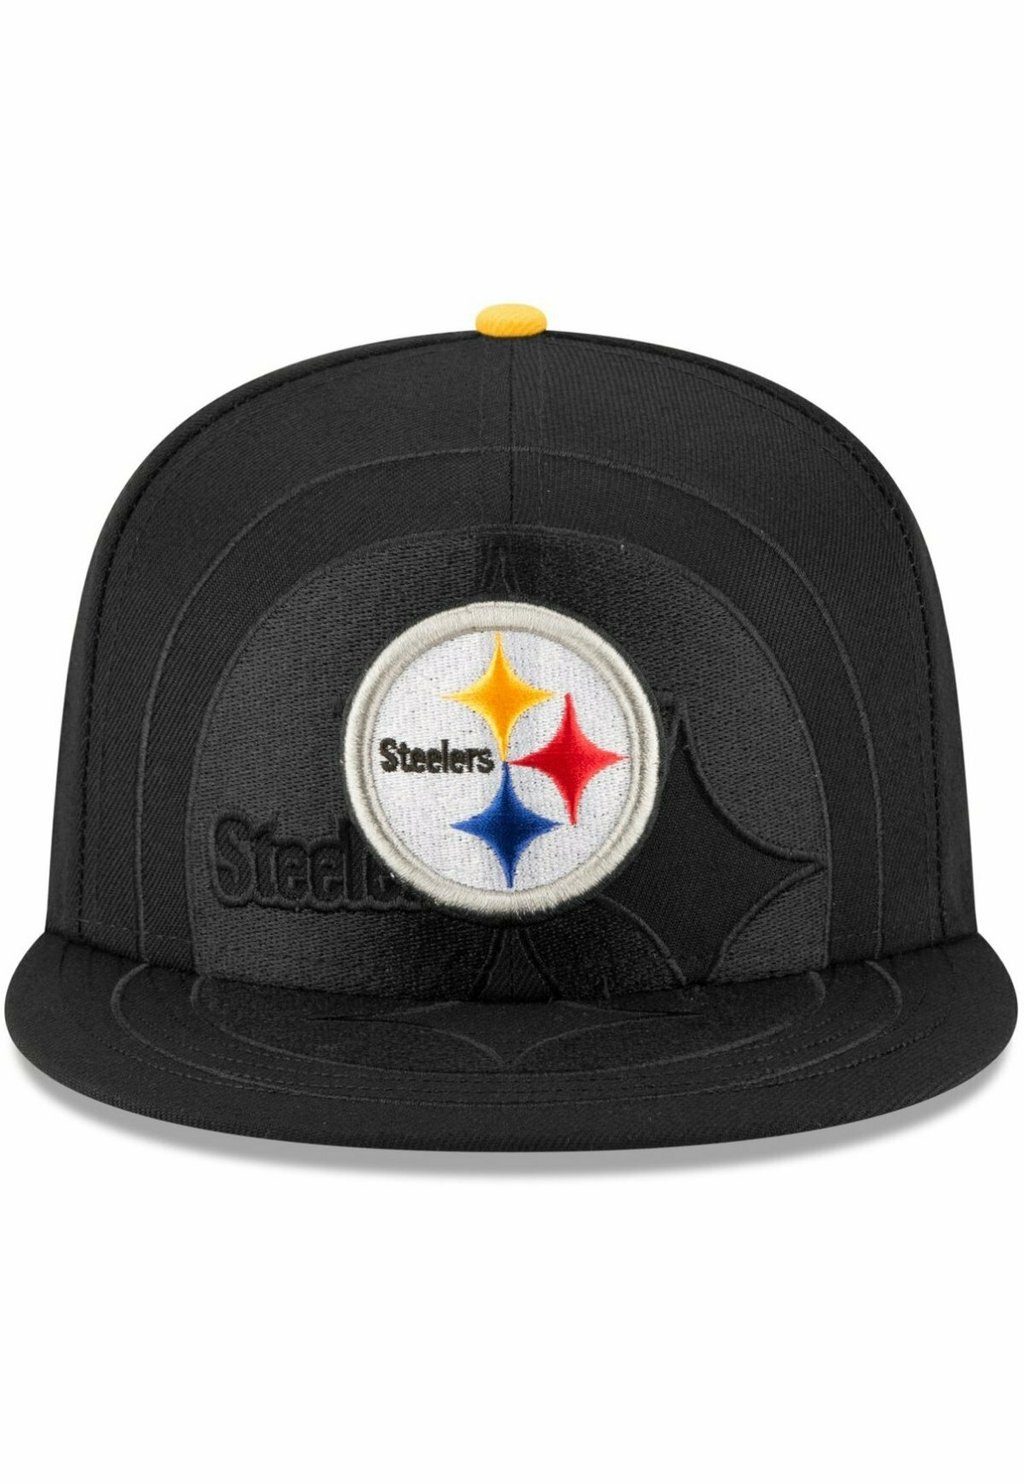 Бейсболка 59FIFTY SPILL LOGO NFL TEAMS New Era, цвет pittsburgh steelers new 2021 steelers men s fans rugby jerseys sports fans bush american wear devin football pittsburgh jersey stitched t shirts